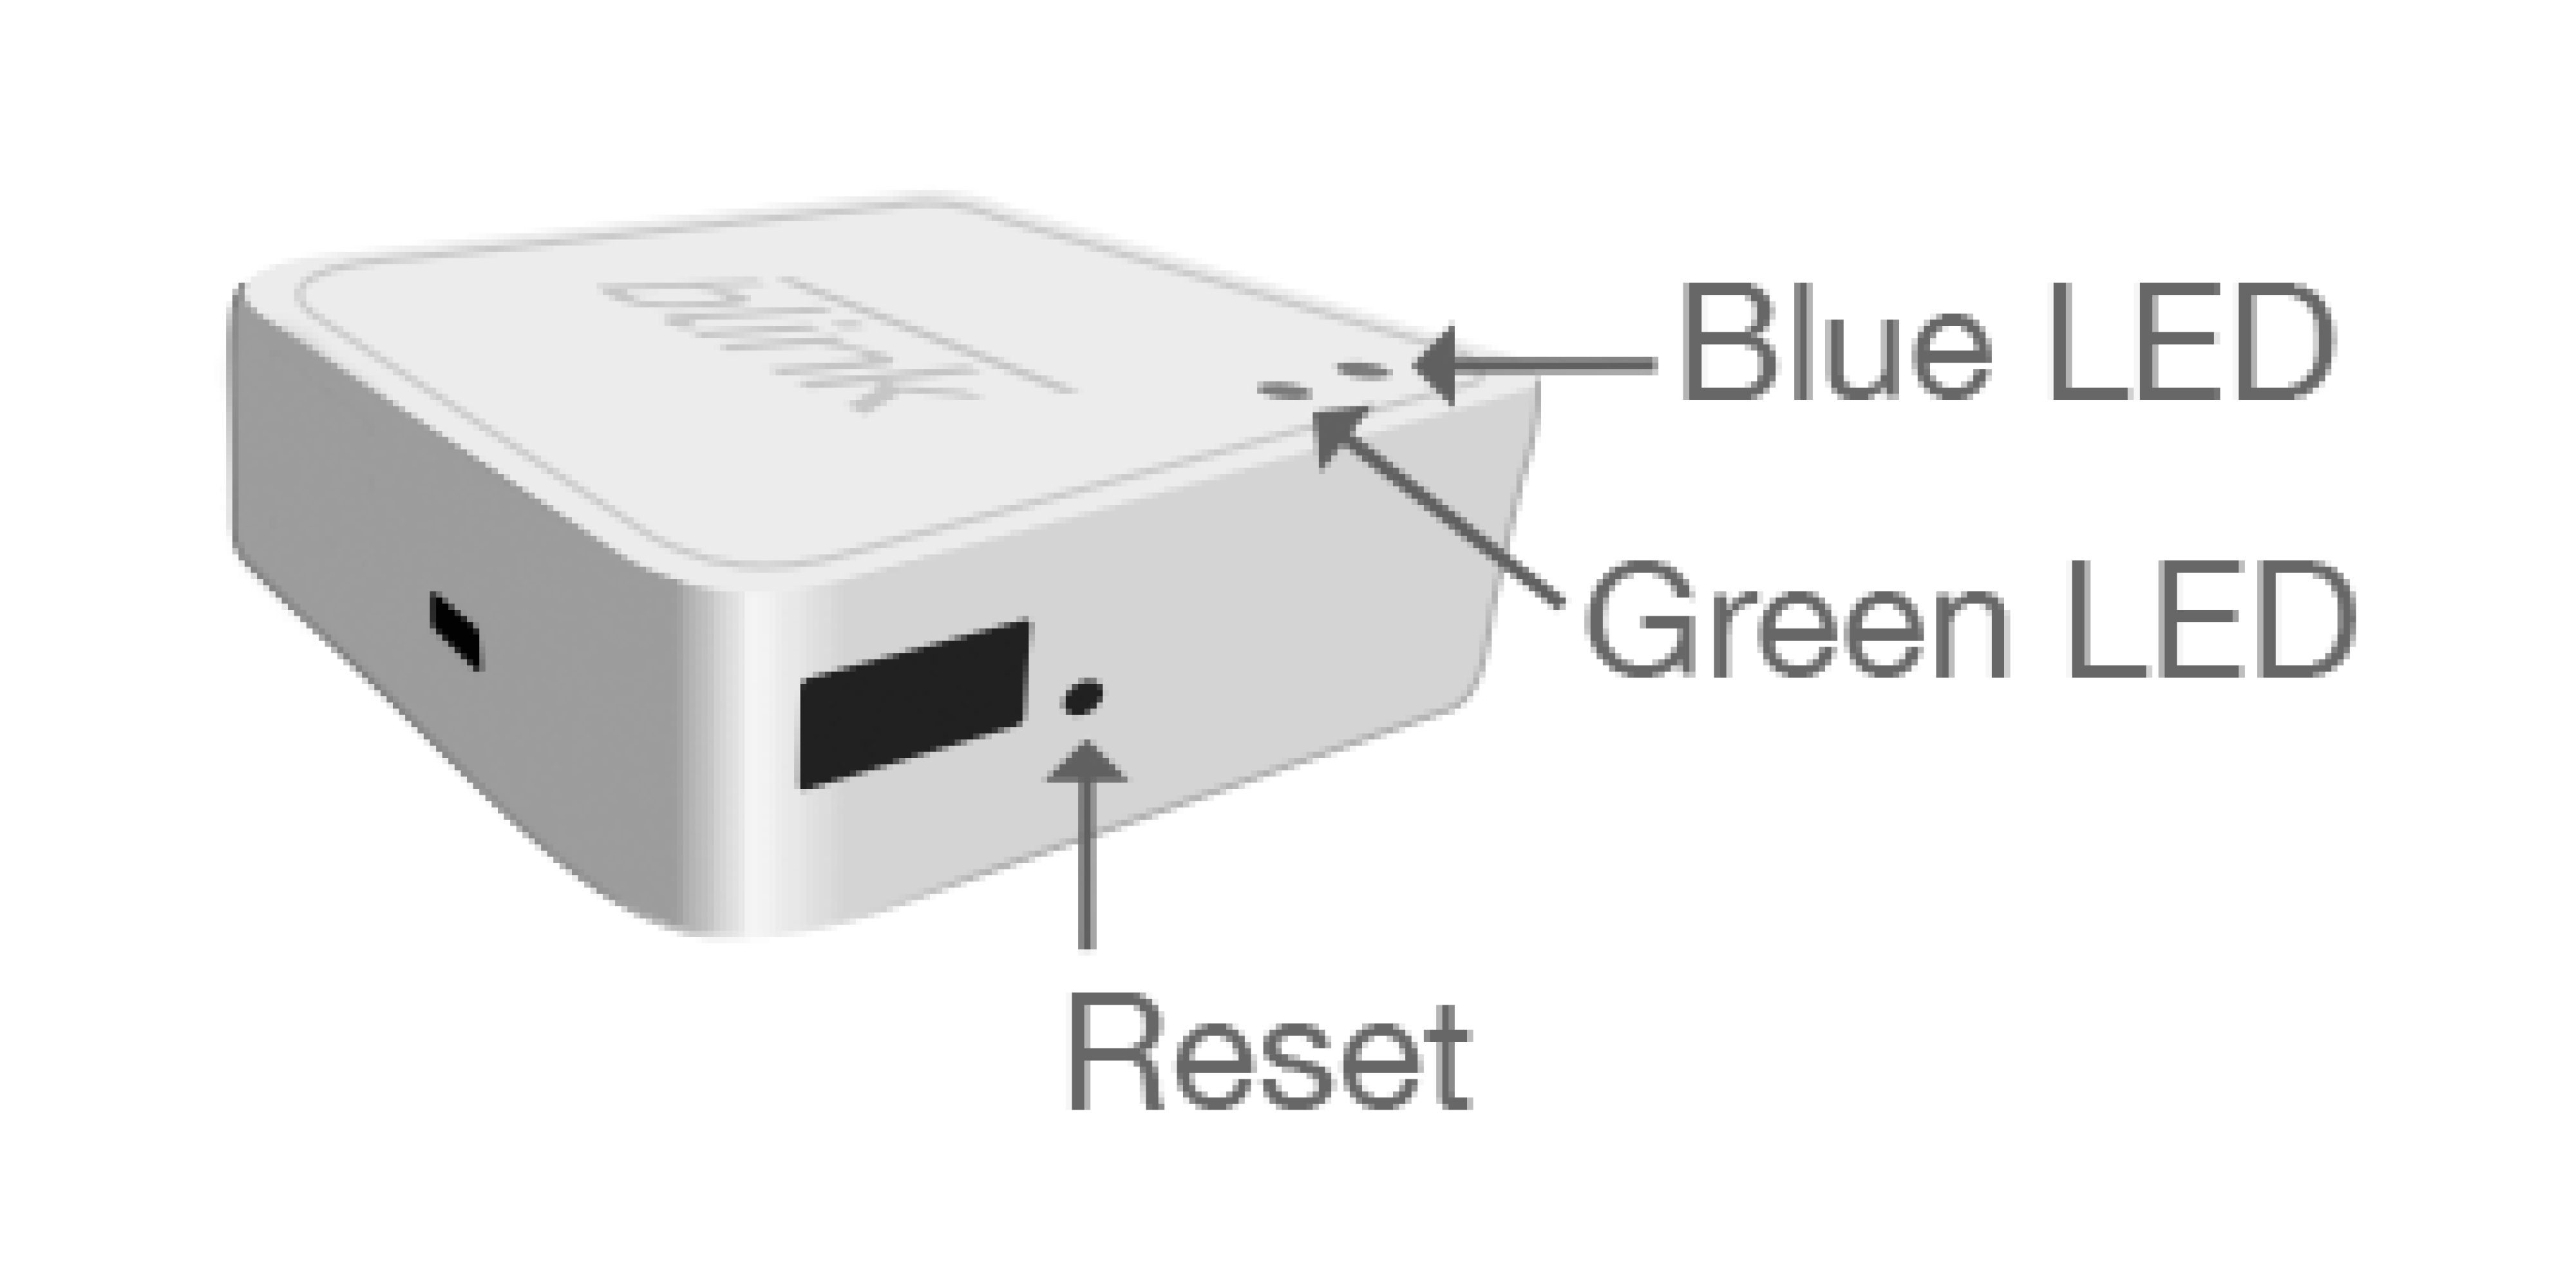 Image showing the Sync Module (1st Gen) with a reset button next to the USB port.